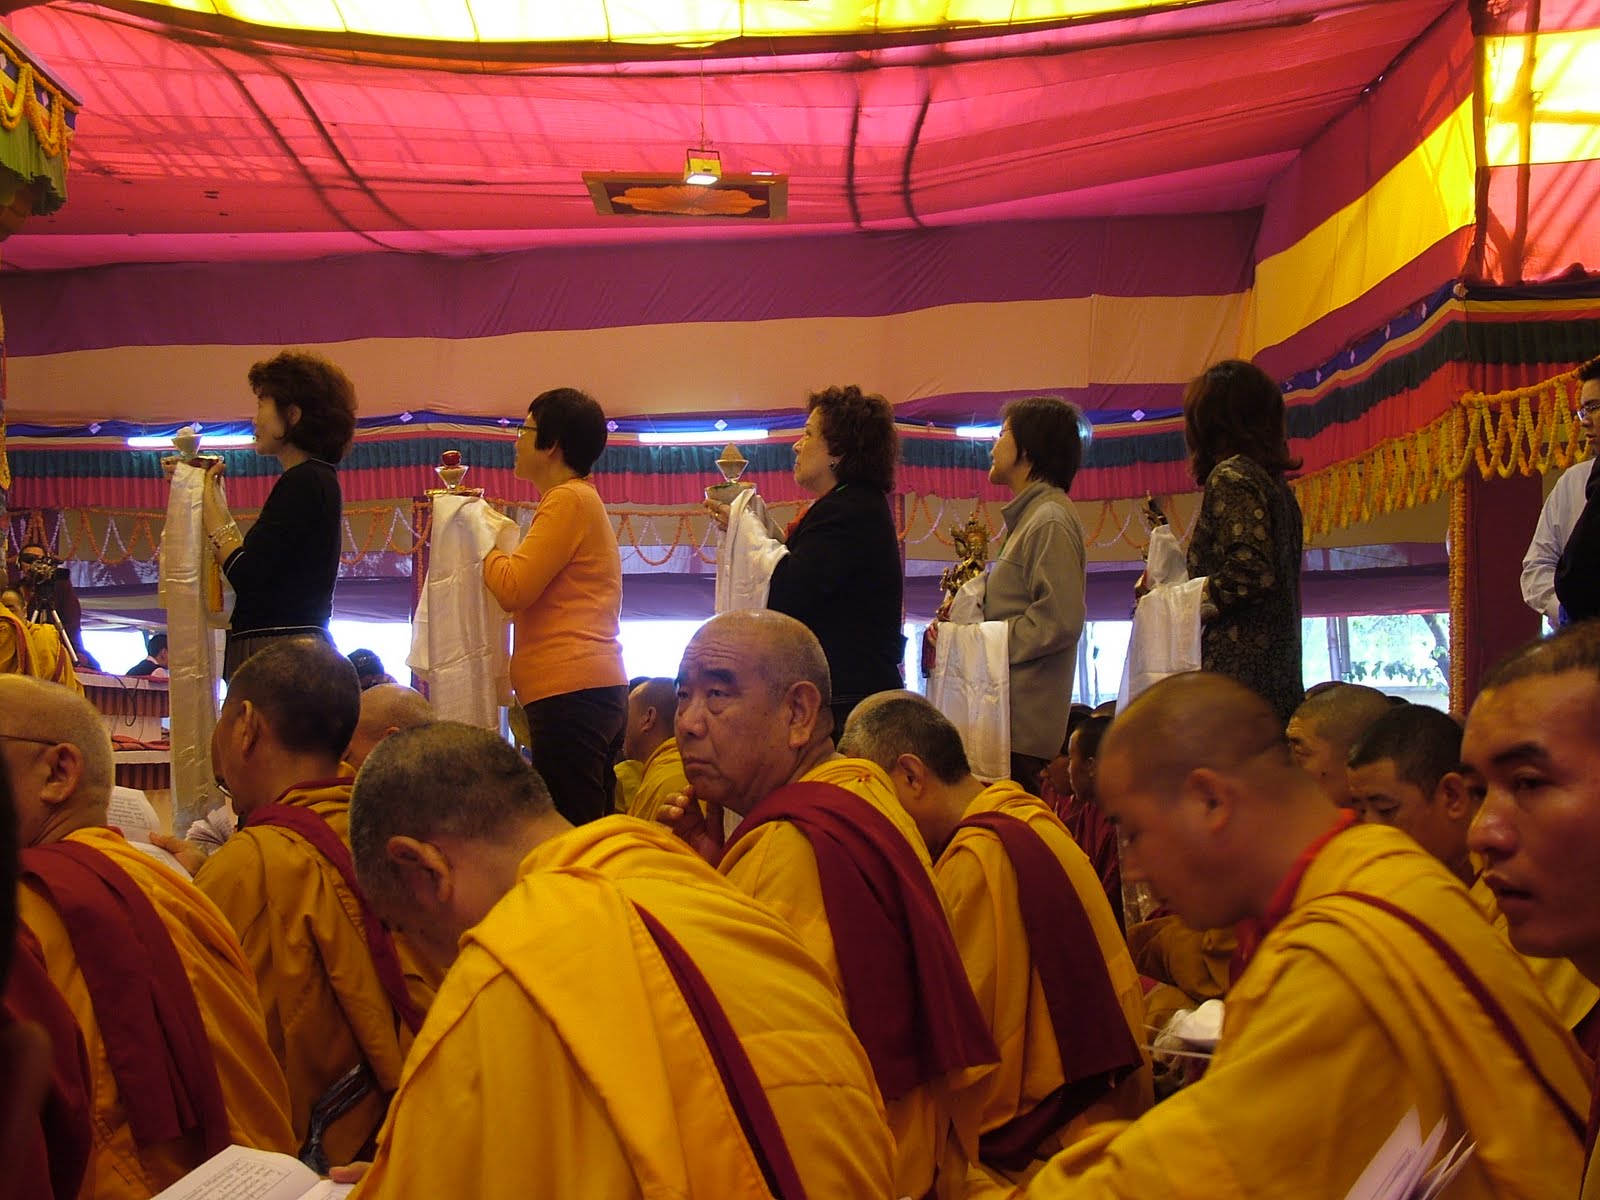 FPMT Geshes during long life puja offered to His Holiness the Dalai Lama in Saranath January 2008.